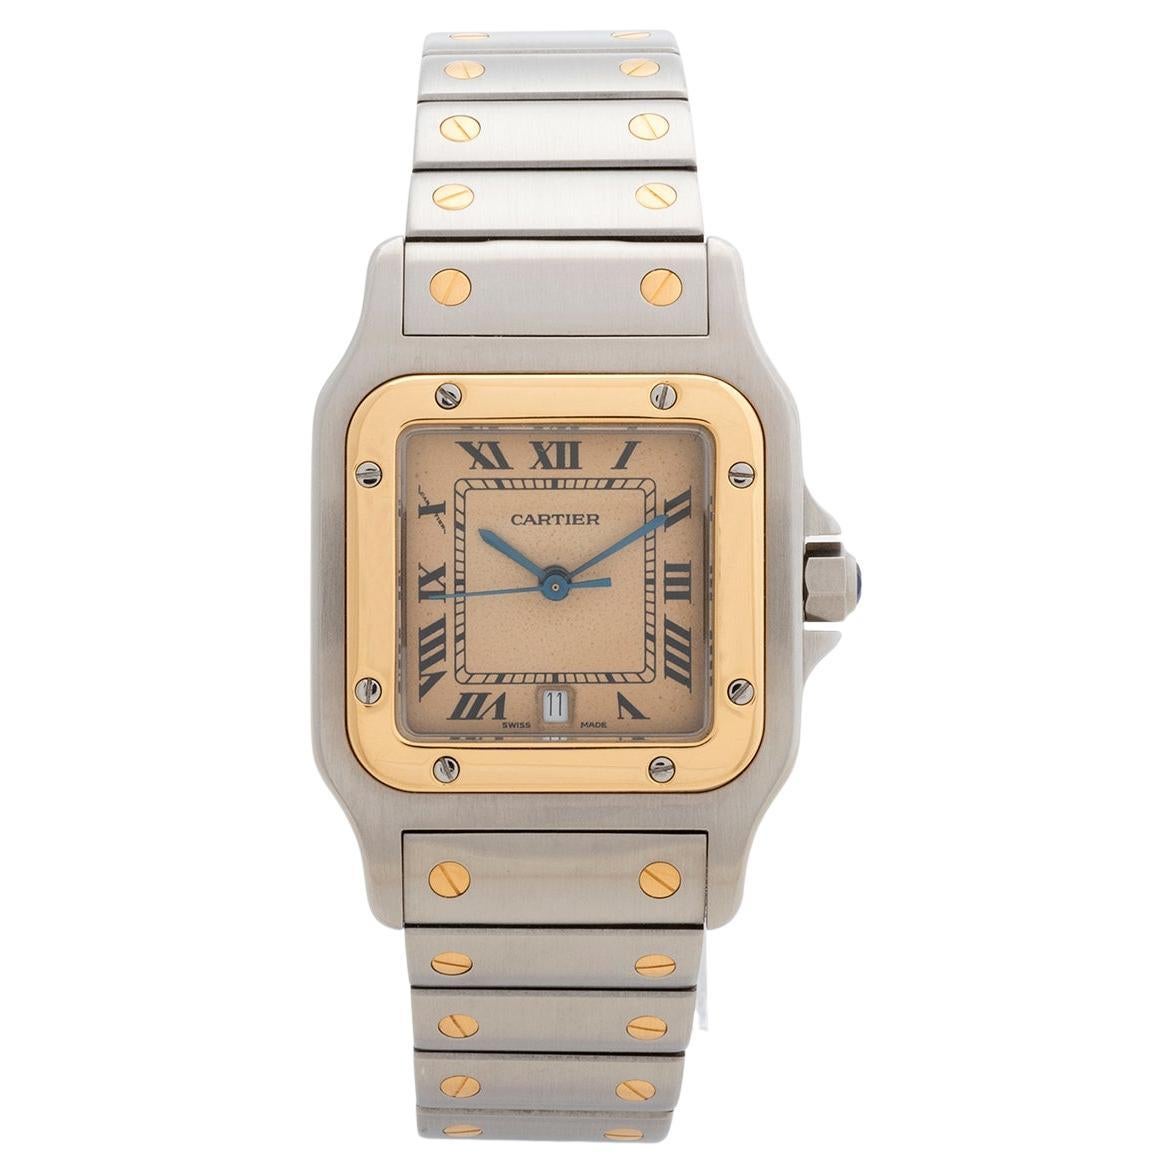 Our Cartier Santos Galbee is the large size reference 187901 with 29mm x 41mm steel and gold case with steel and gold bracelet and attractive lightly patinated dial. This example is presented in excellent condition with light signs of use overall. A